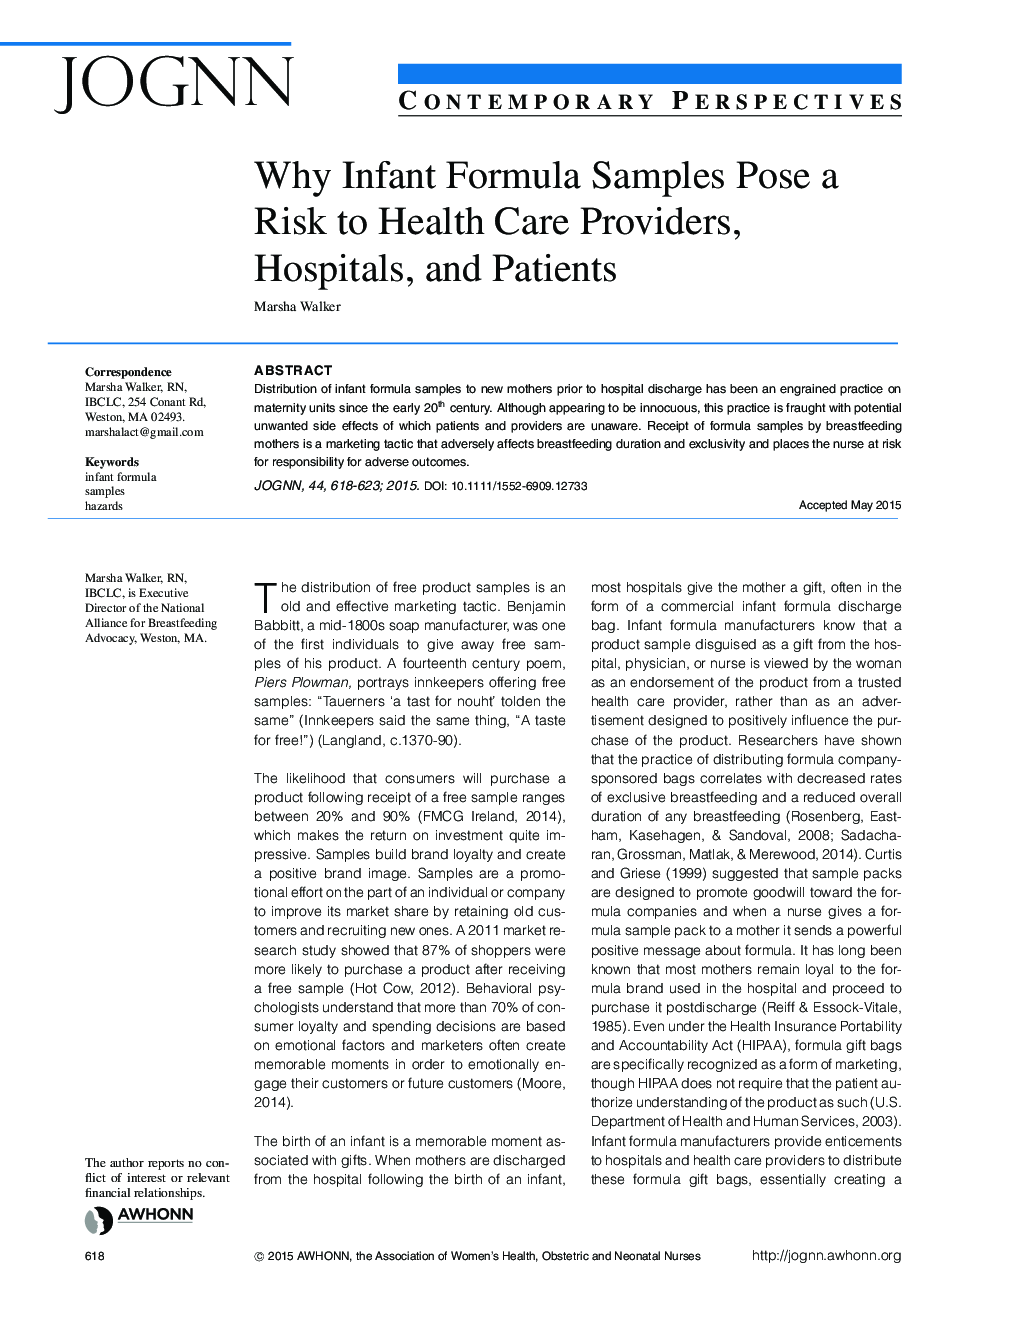 Why Infant Formula Samples Pose a Risk to Health Care Providers, Hospitals, and Patients